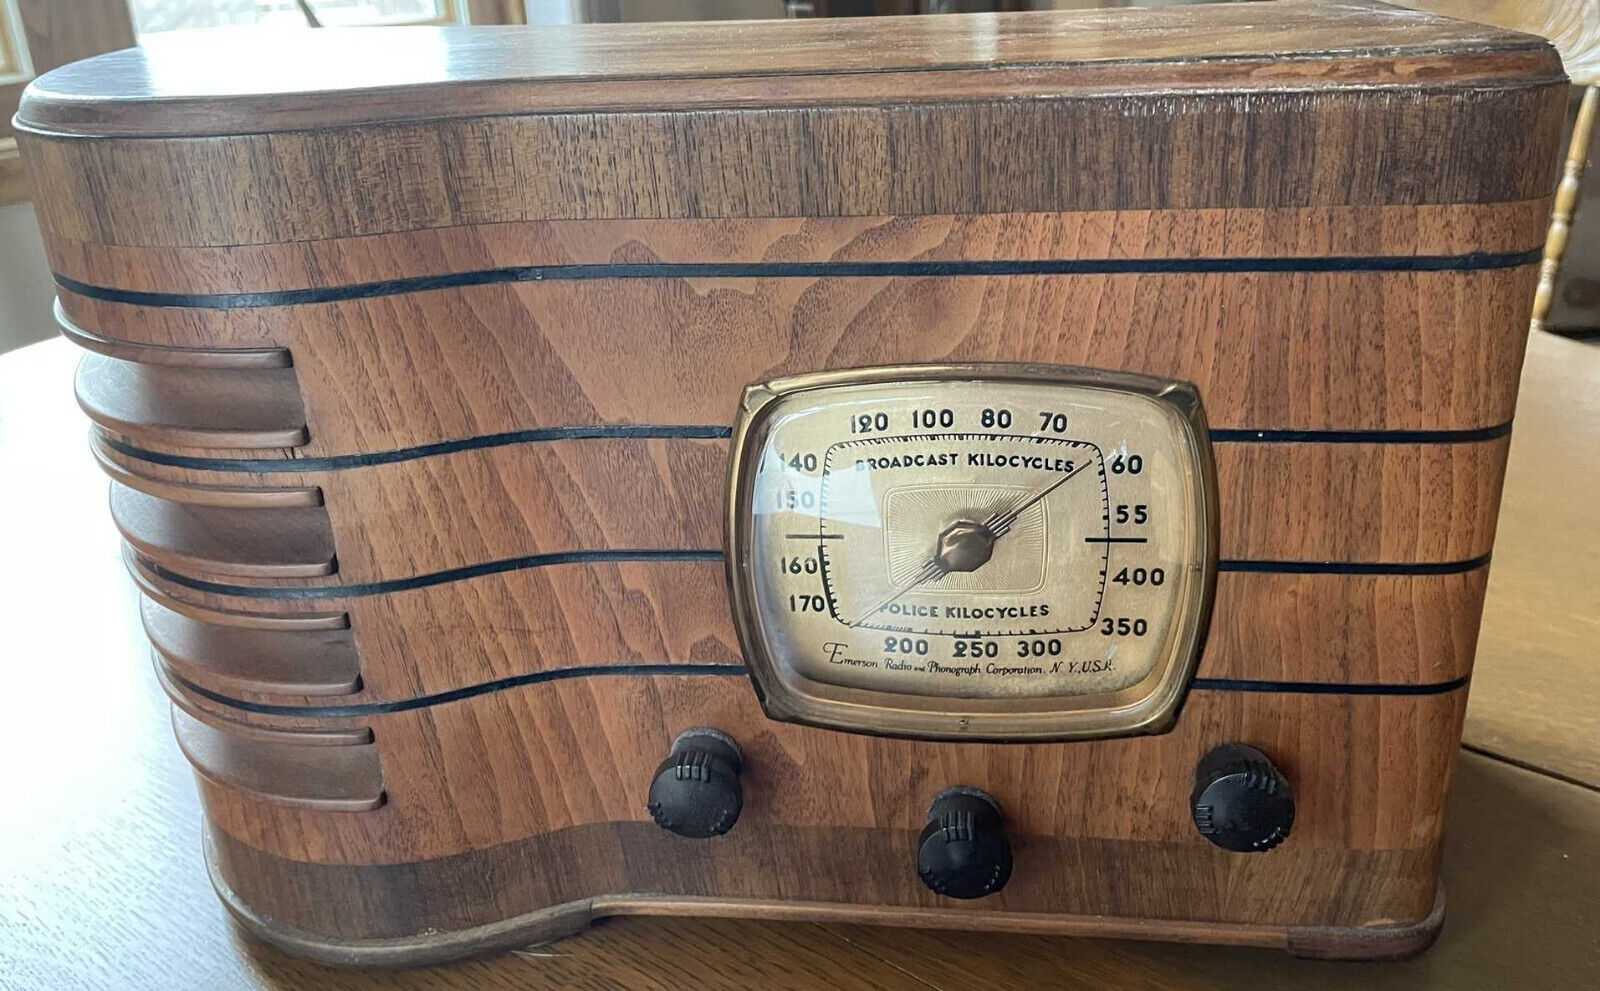 Very desirable Emerson R-167 AM/SW radio from 1937 - works